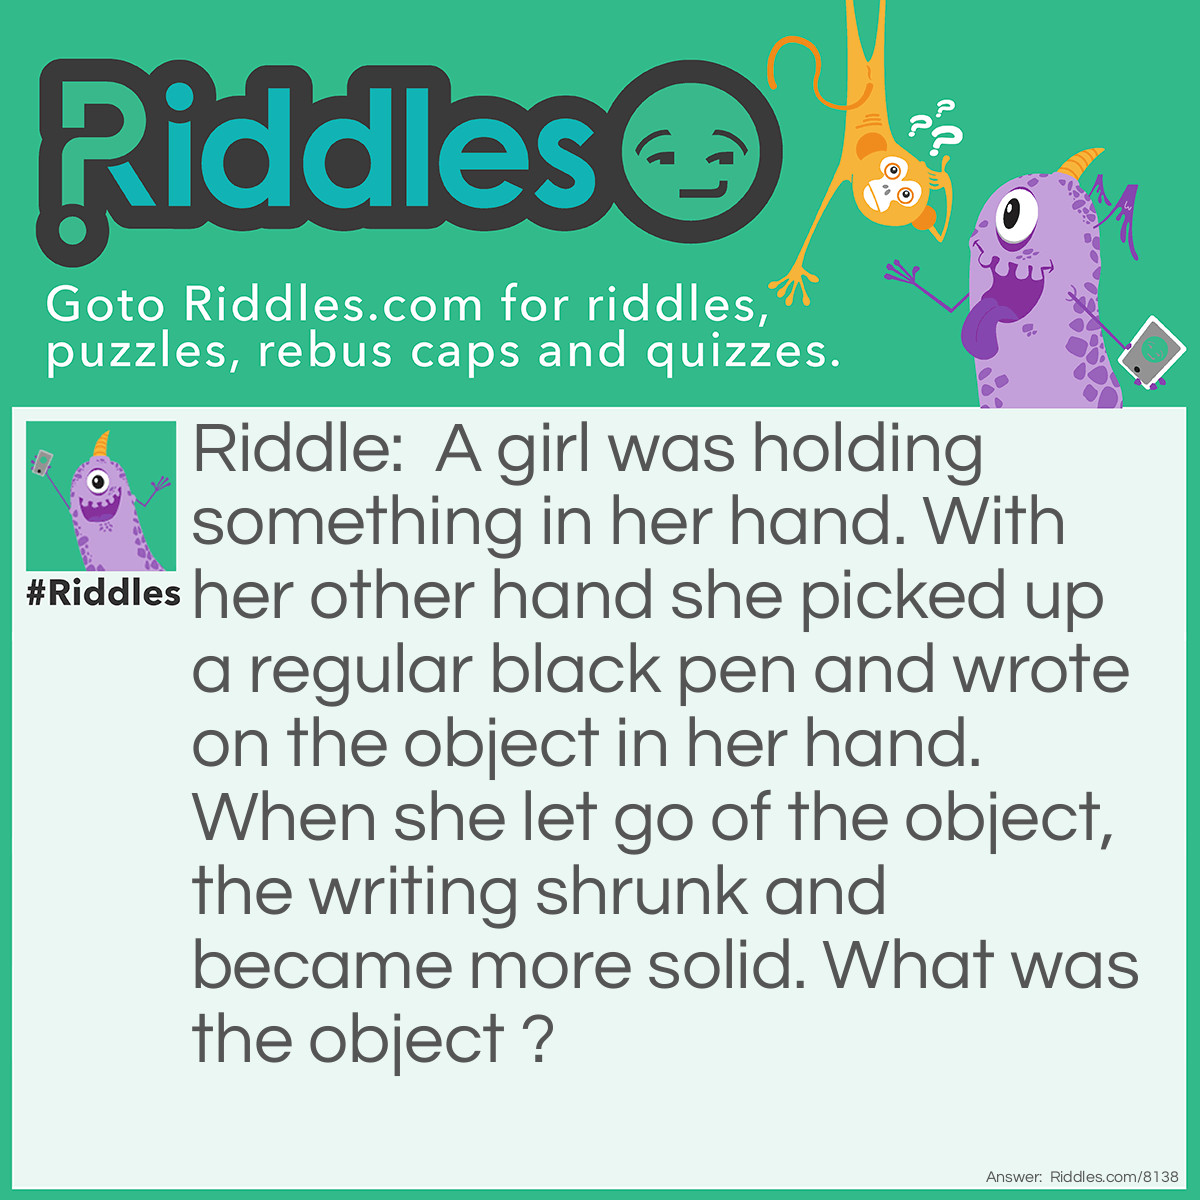 Riddle: A girl was holding something in her hand. With her other hand she picked up a regular black pen and wrote on the object in her hand. When she let go of the object, the writing shrunk and became more solid. What was the object ? Answer: An untied balloon